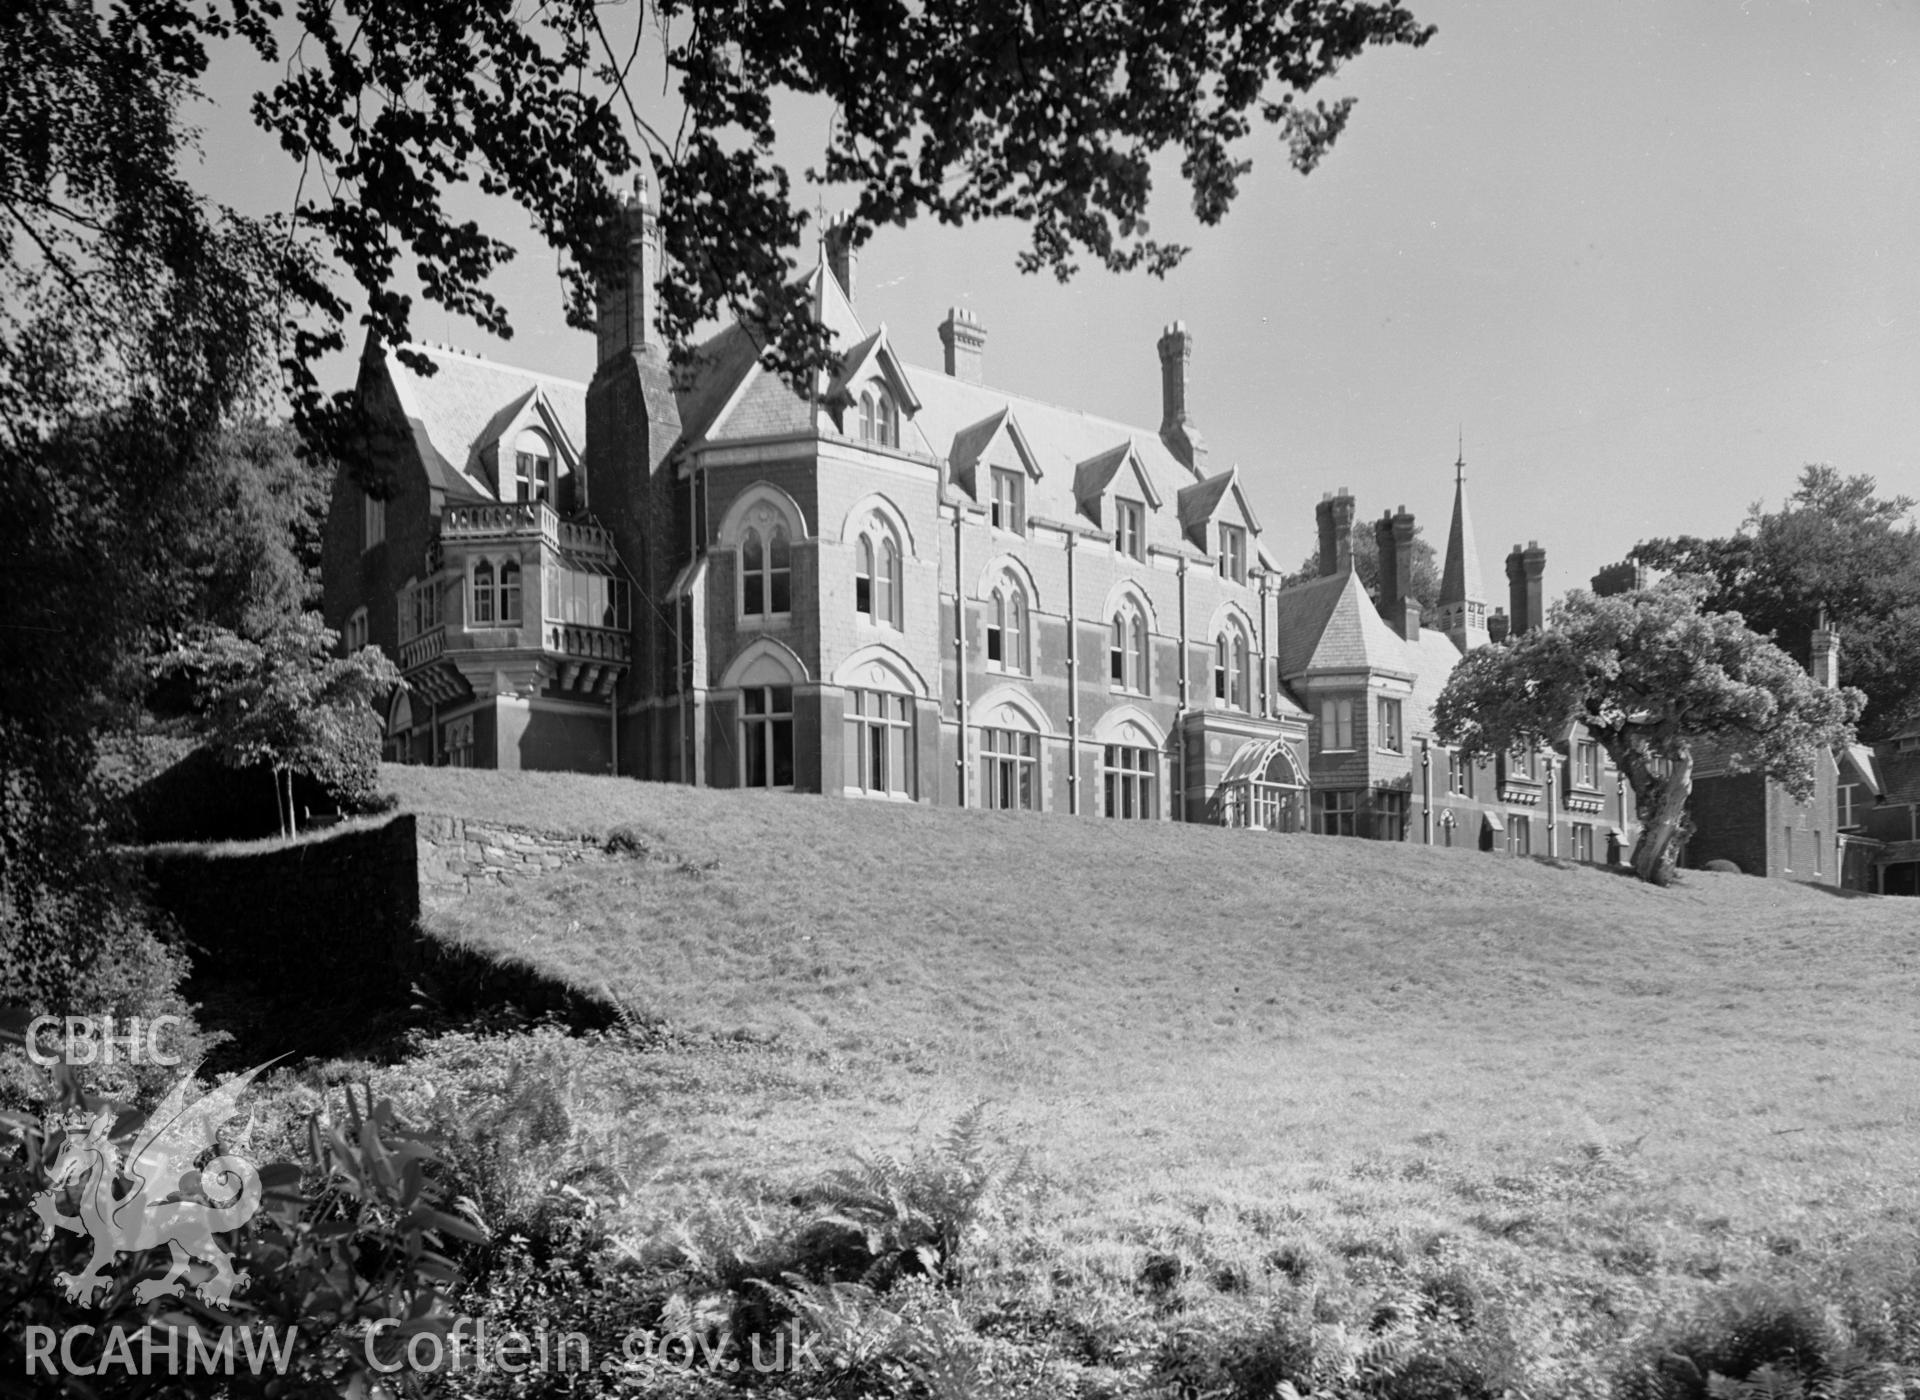 A view of Voelas Hall from the south west.